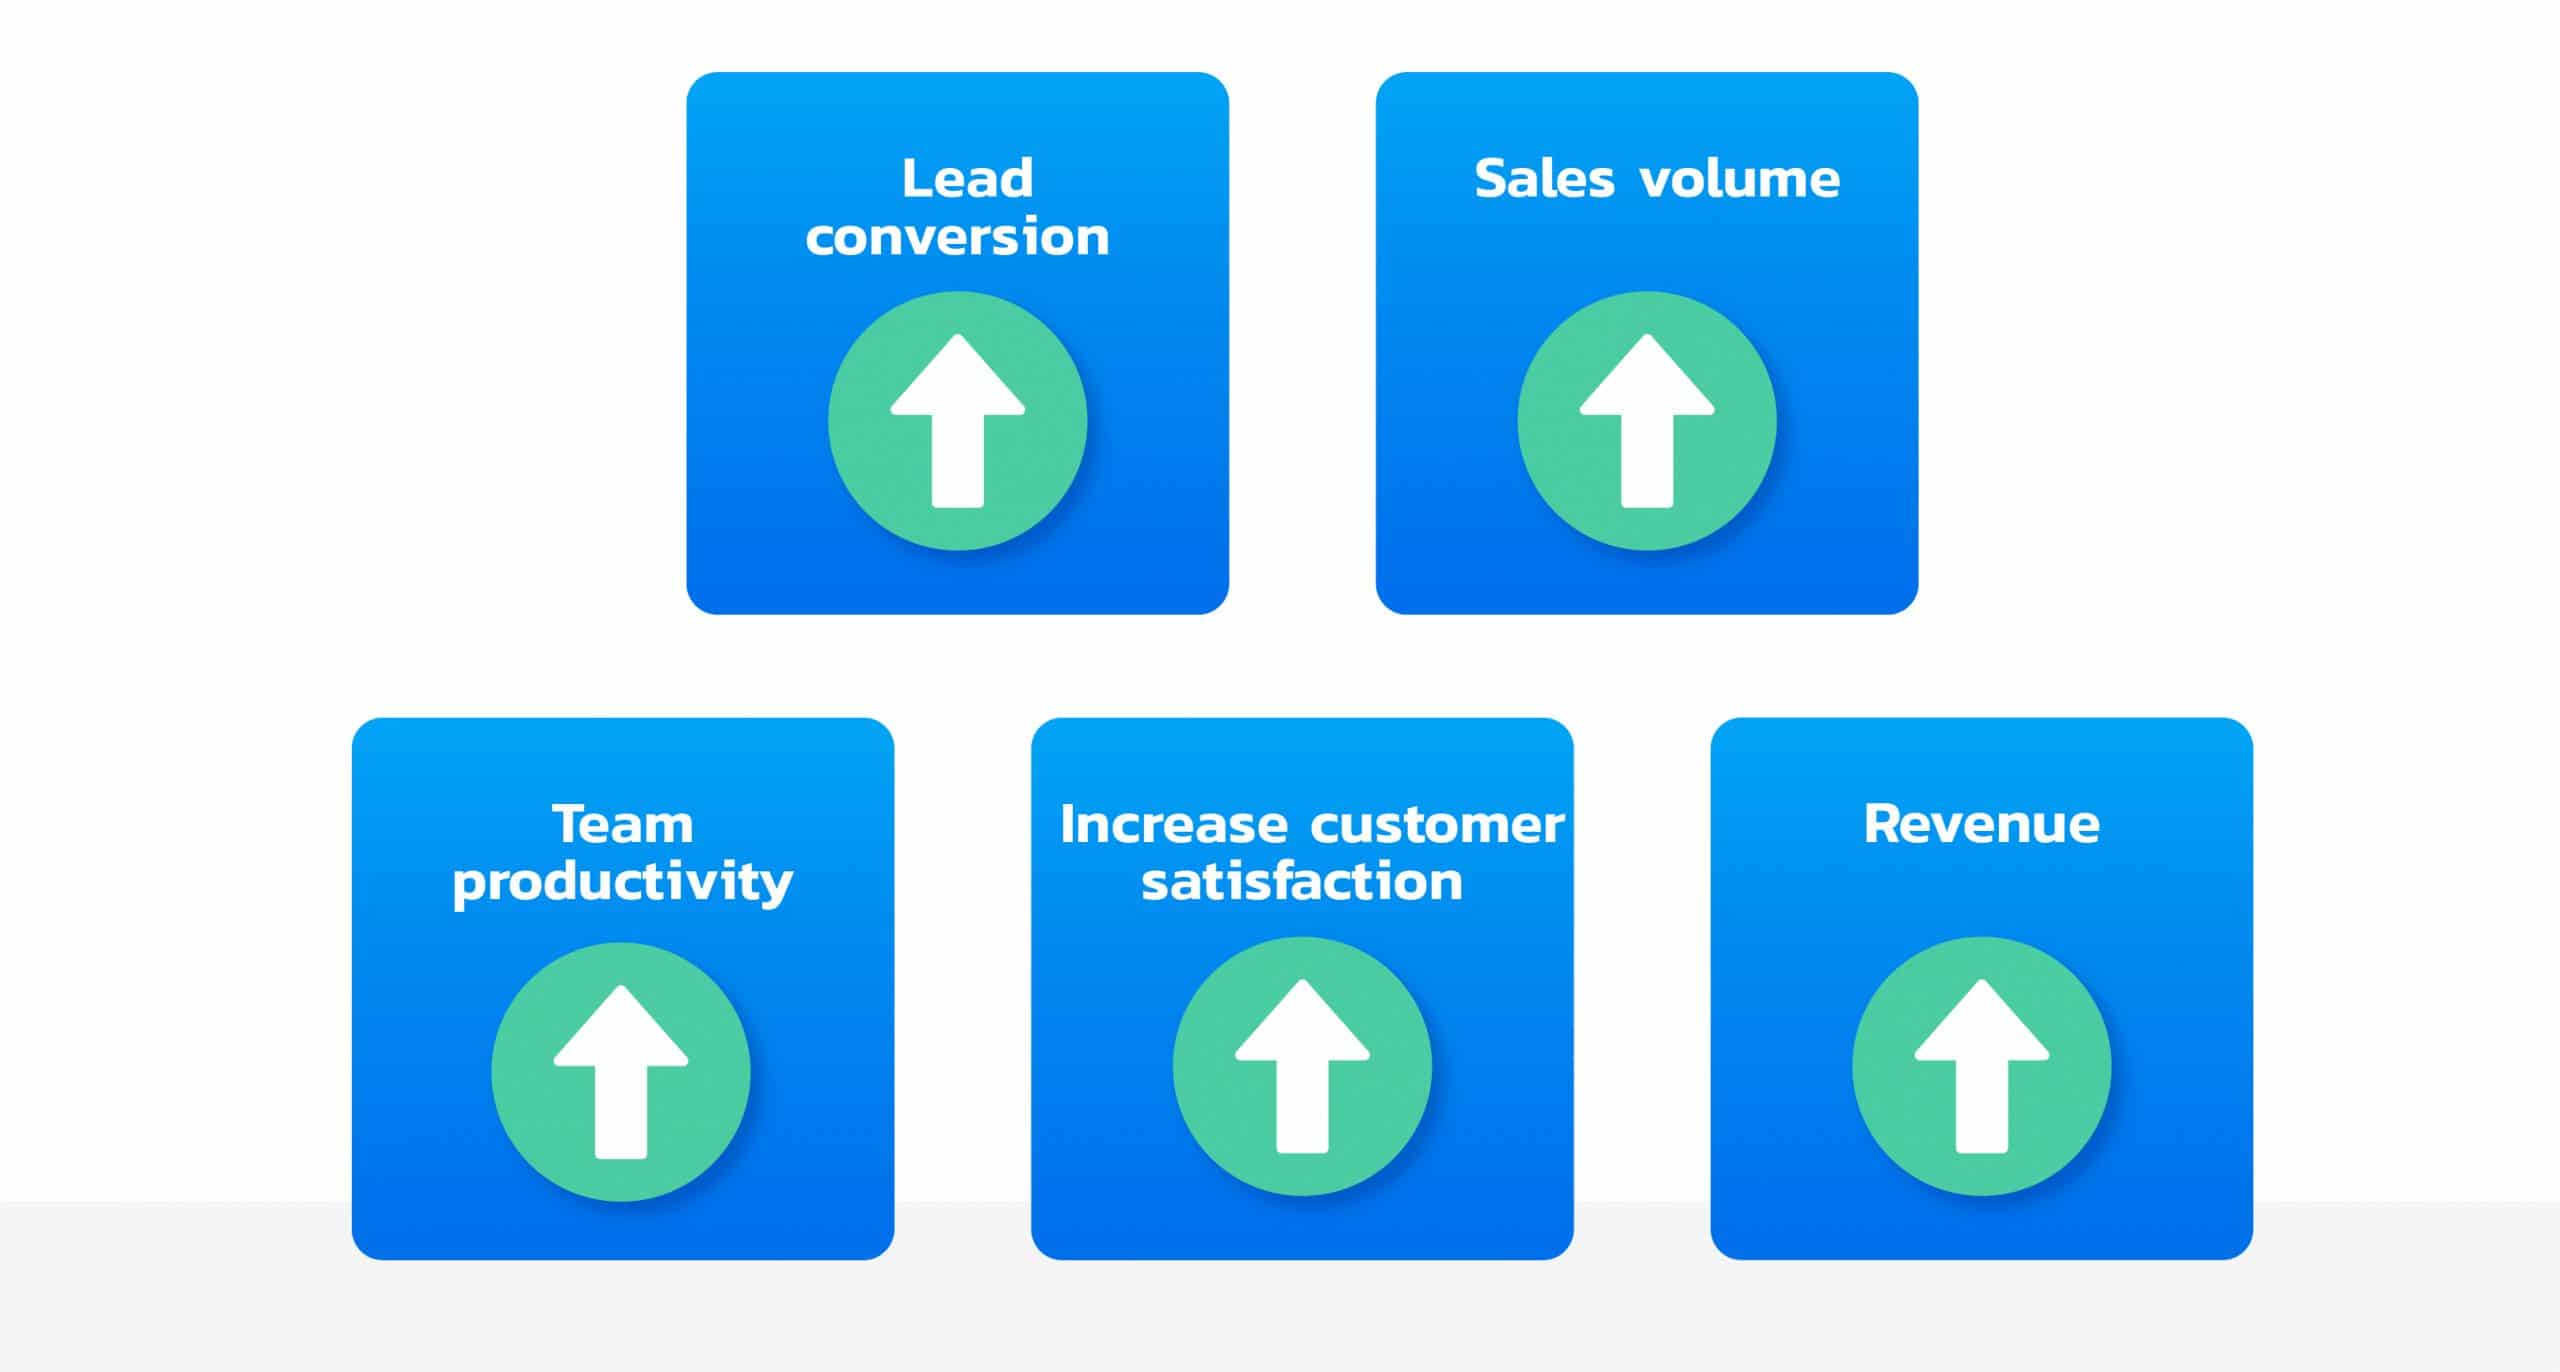 crm with benefit of increasing in sales revenue, customer satisfaction, Lead conversation, team productivity, sales volume